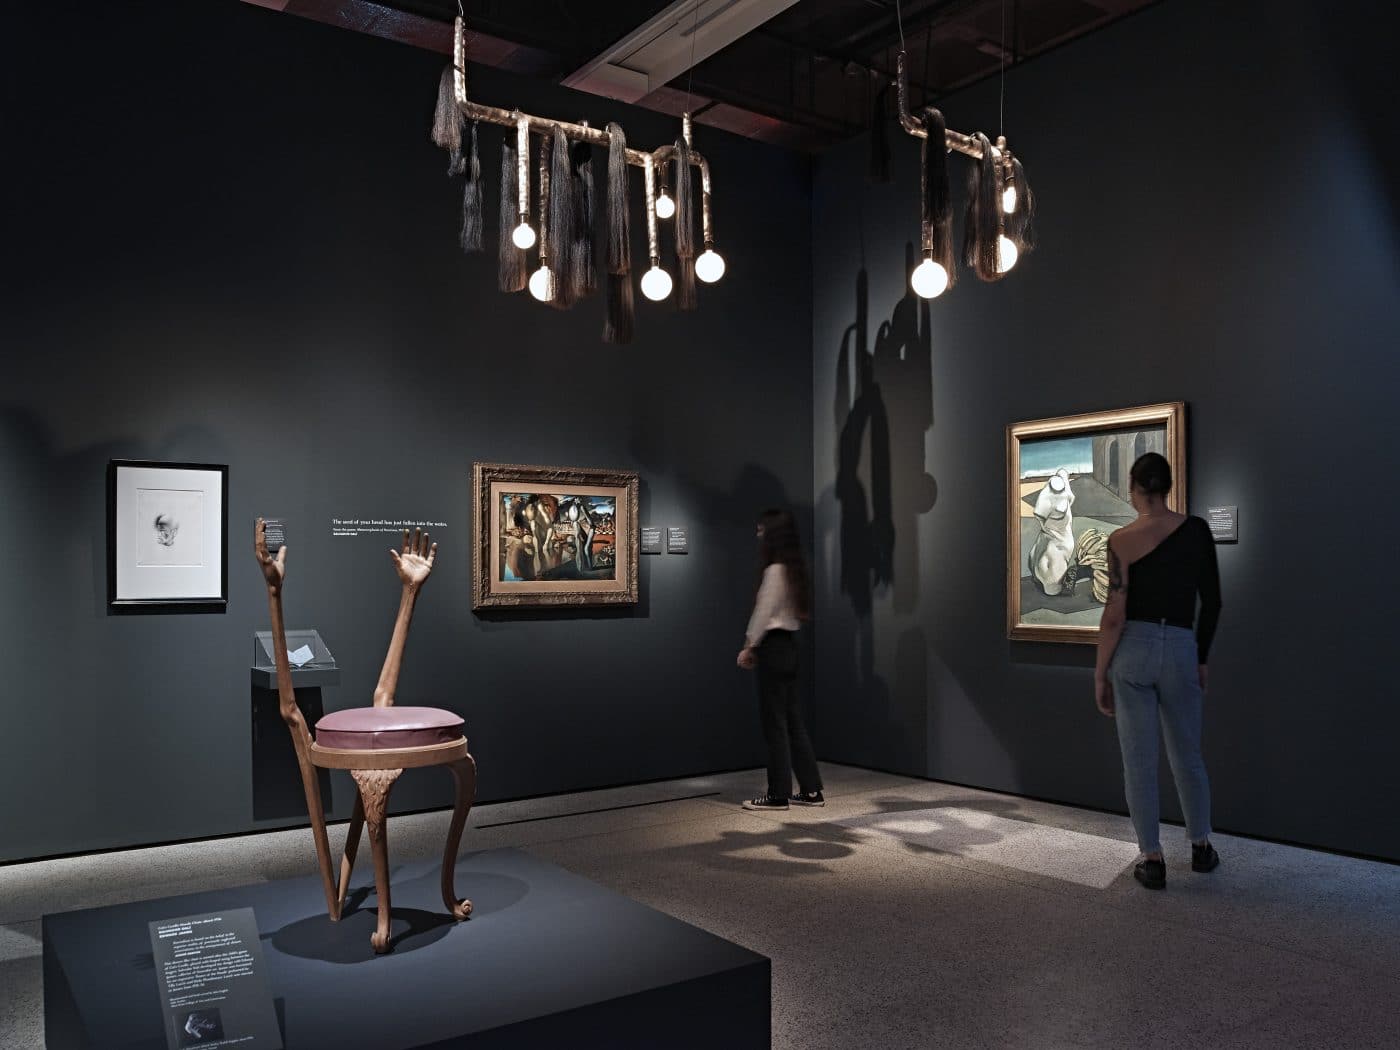 Installation view of the exhibition "Objects of Desire: Surrealism and Design 1924–Today" at the Design Museum in London